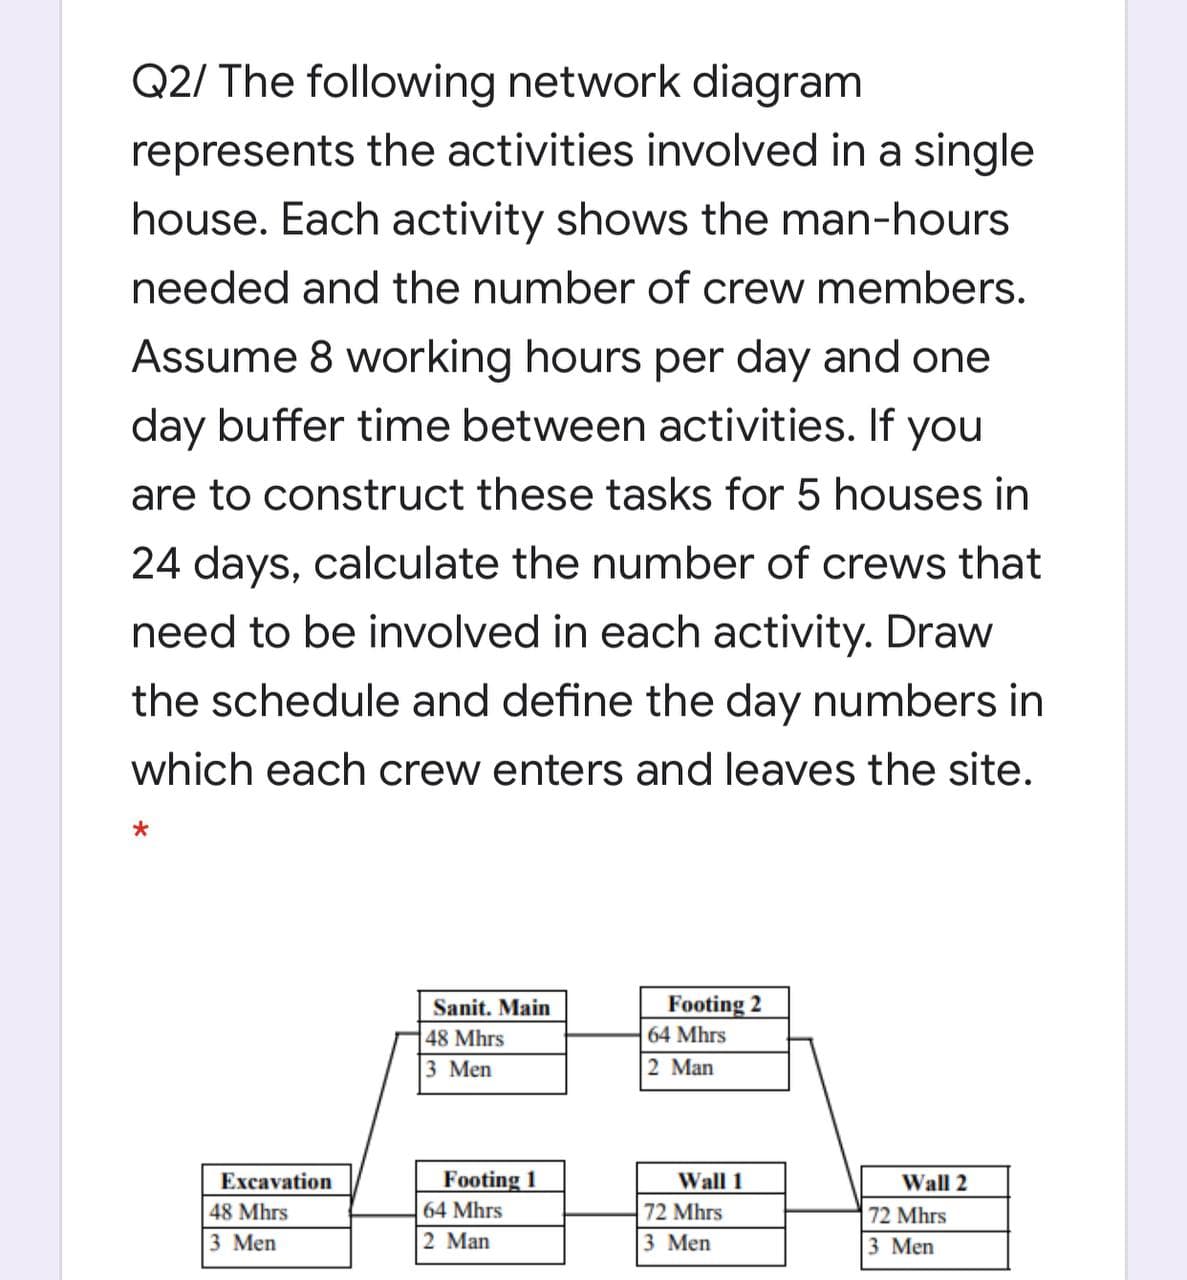 Q2/ The following network diagram
represents the activities involved in a single
house. Each activity shows the man-hours
needed and the number of crew members.
Assume 8 working hours per day and one
day buffer time between activities. If you
are to construct these tasks for 5 houses in
24 days, calculate the number of crews that
need to be involved in each activity. Draw
the schedule and define the day numbers in
which each crew enters and leaves the site.
Sanit. Main
Footing 2
48 Mhrs
64 Mhrs
3 Men
2 Man
Excavation
Footing 1
Wall 1
Wall 2
48 Mhrs
64 Mhrs
72 Mhrs
72 Mhrs
3 Men
2 Man
3 Men
3 Men
